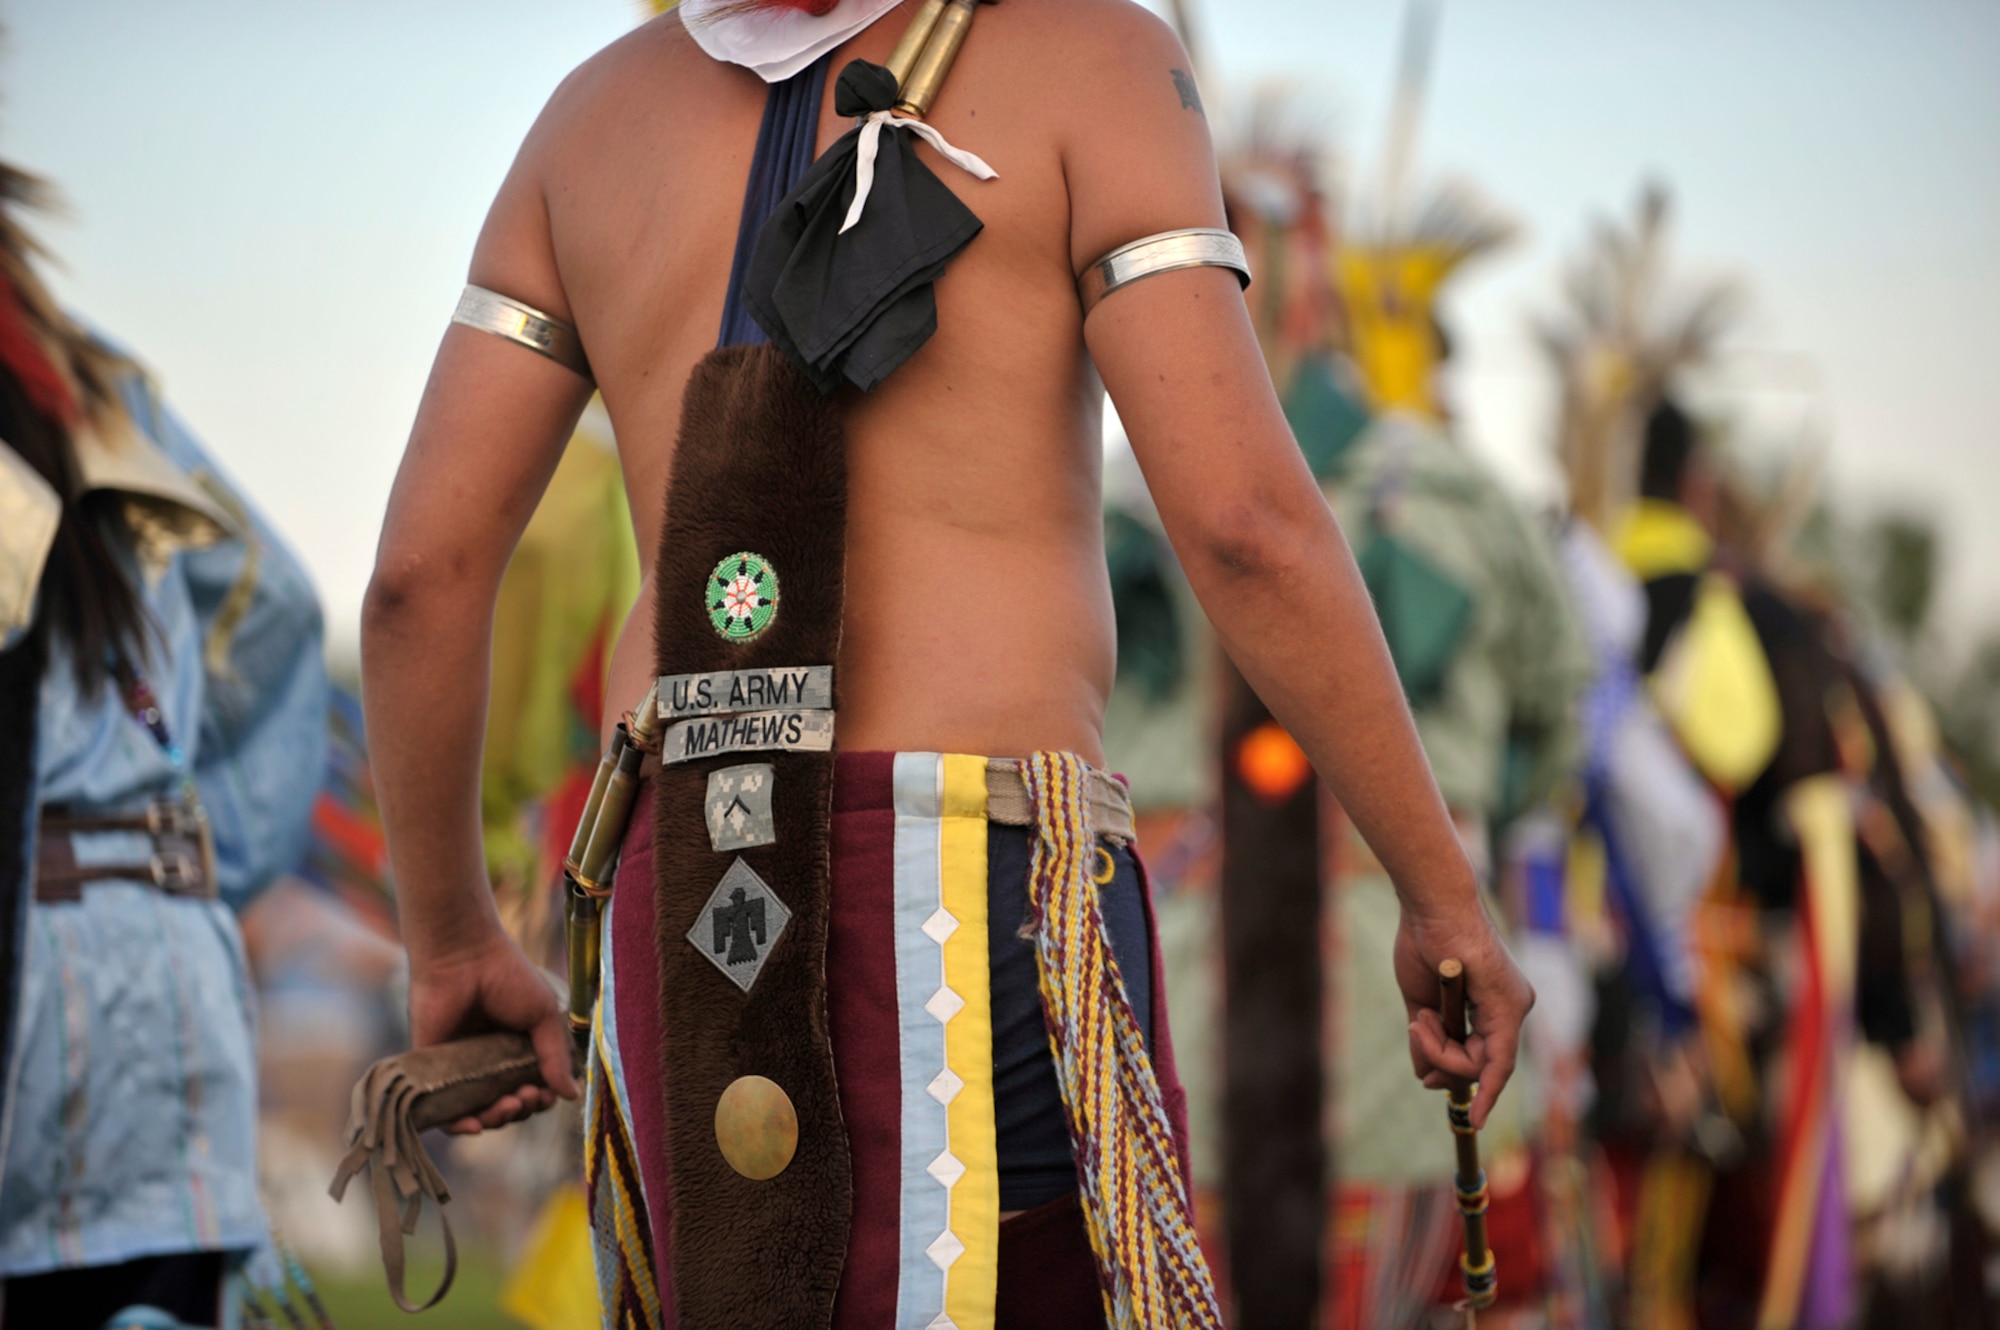 Pvt. Skyler Mathews proudly displays his U.S. Army membership on his traditional Kanza dress at the annual pow wow of his tribe, the Kaw Nation, near Kaw City, Okla., on Aug. 2, 2009. Pvt. Mathews is an infantryman in a National Guard unit in Ponca City, Okla. (U.S. Air Force photo/Tech. Sgt. Jason Schaap) 